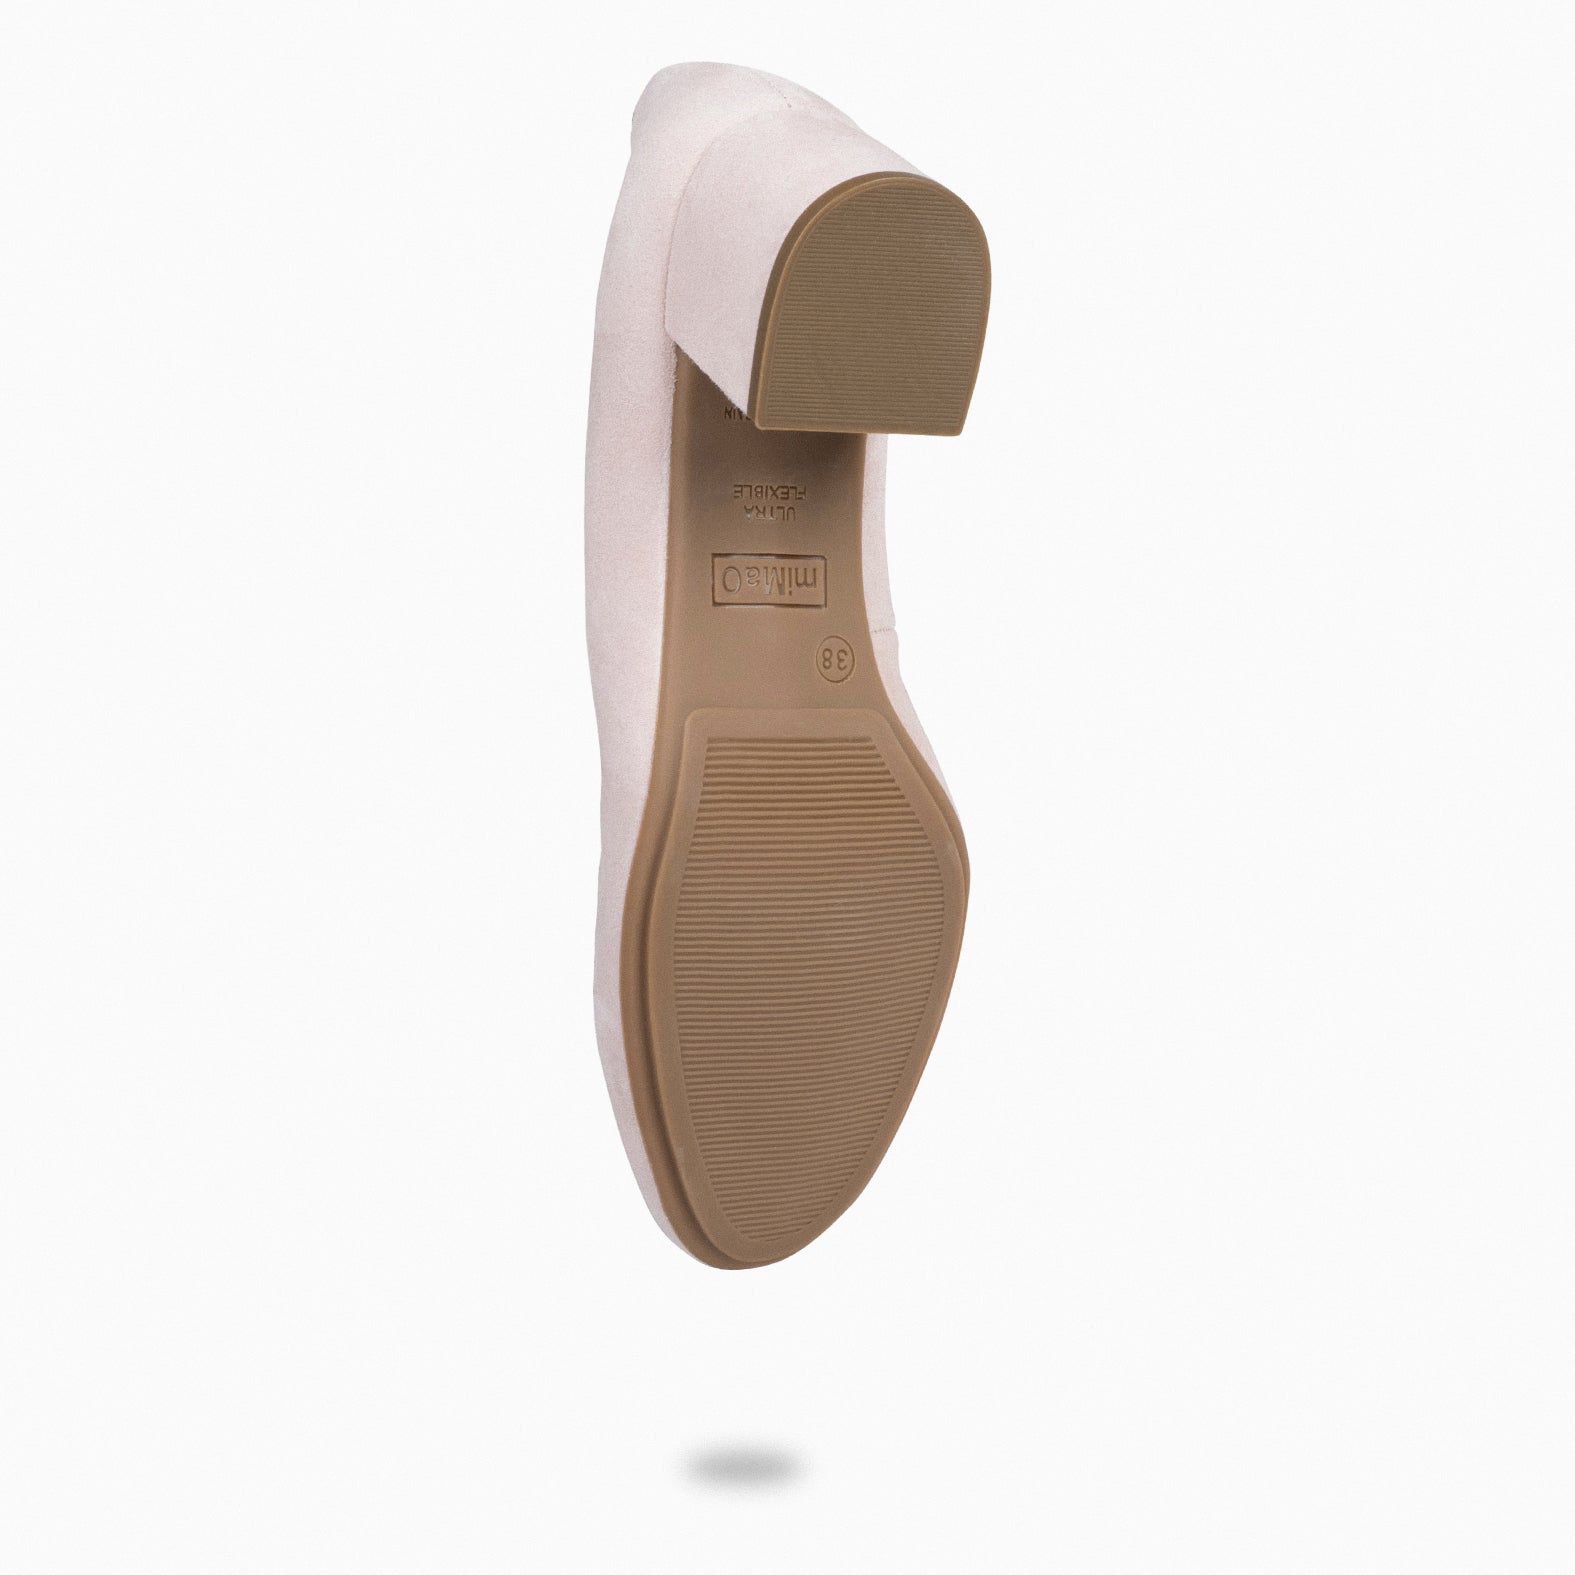 URBAN ROUND – NUDE suede leather low heels